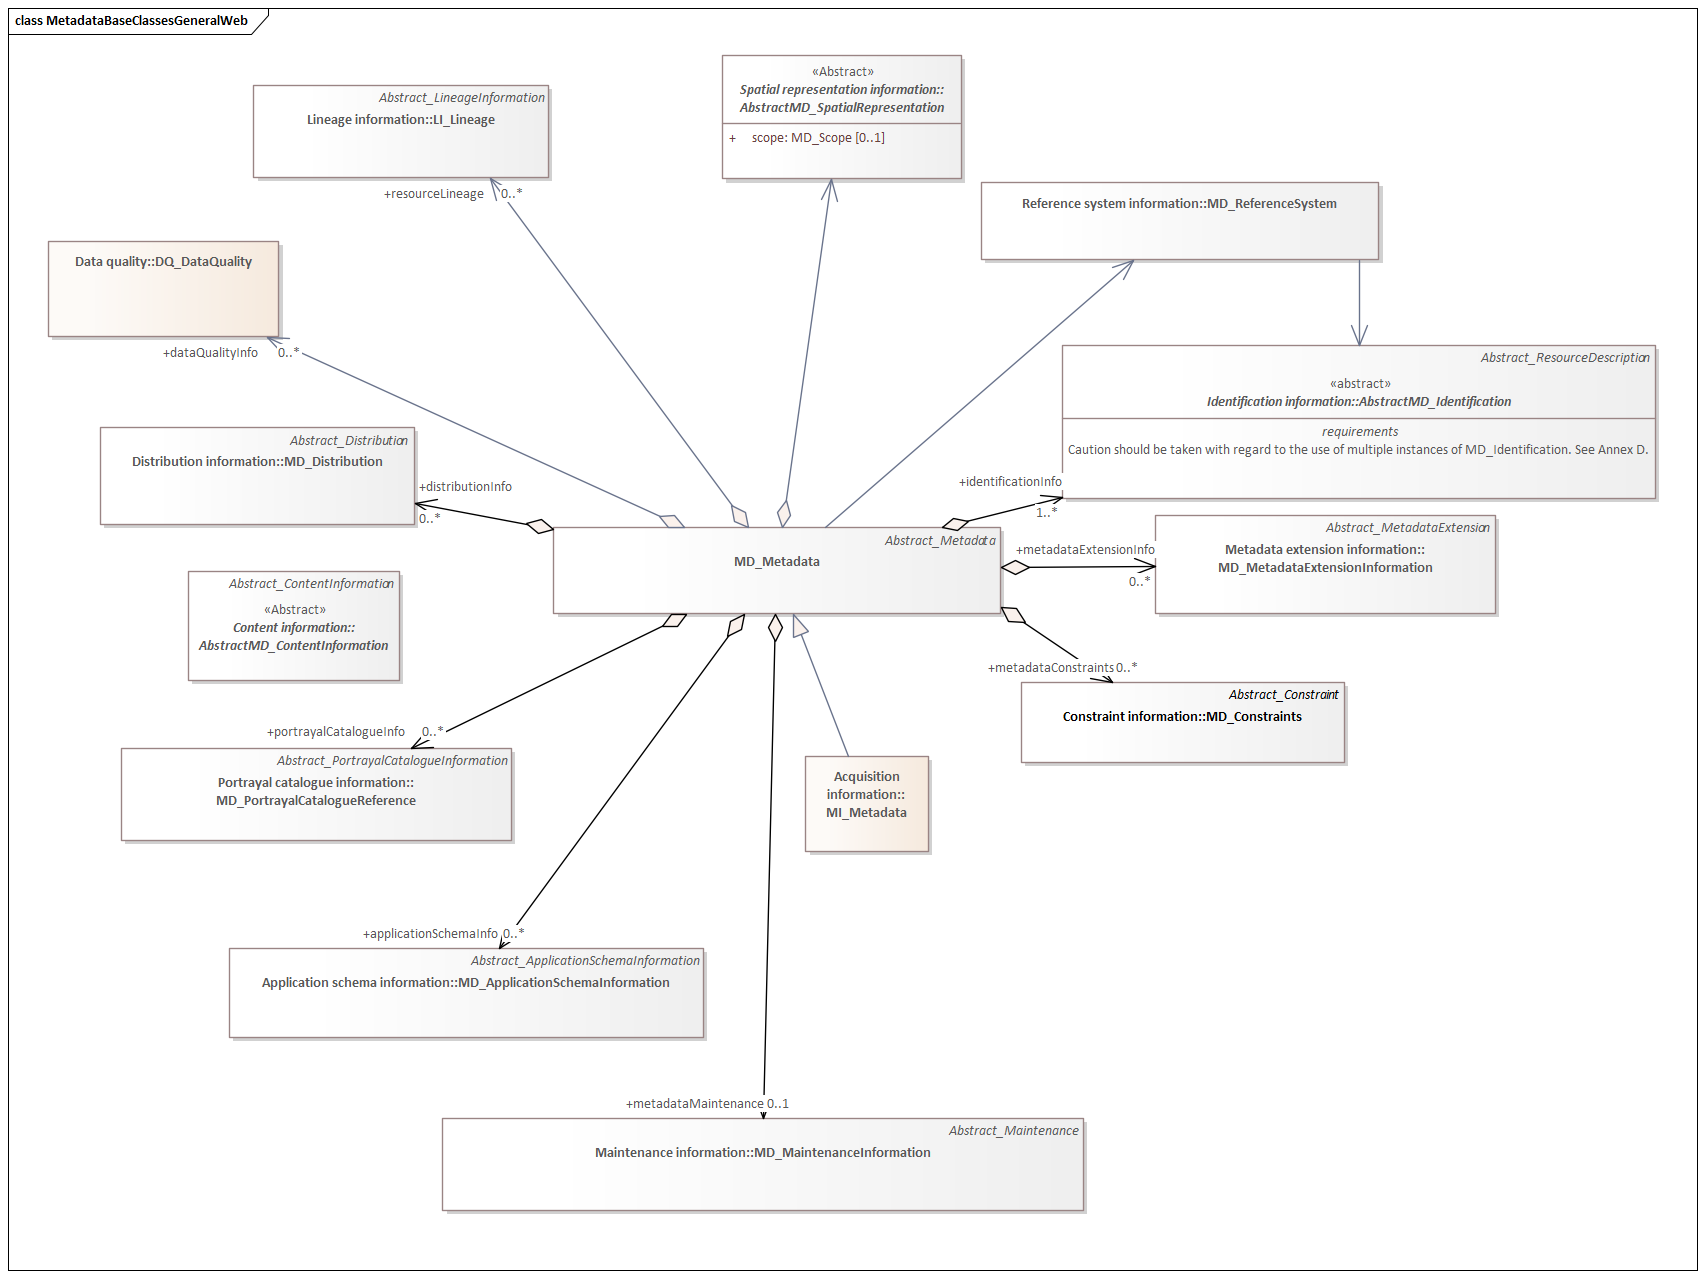 UML overview diagram of MetaData Base class in the mda namespace and classes references by its roles